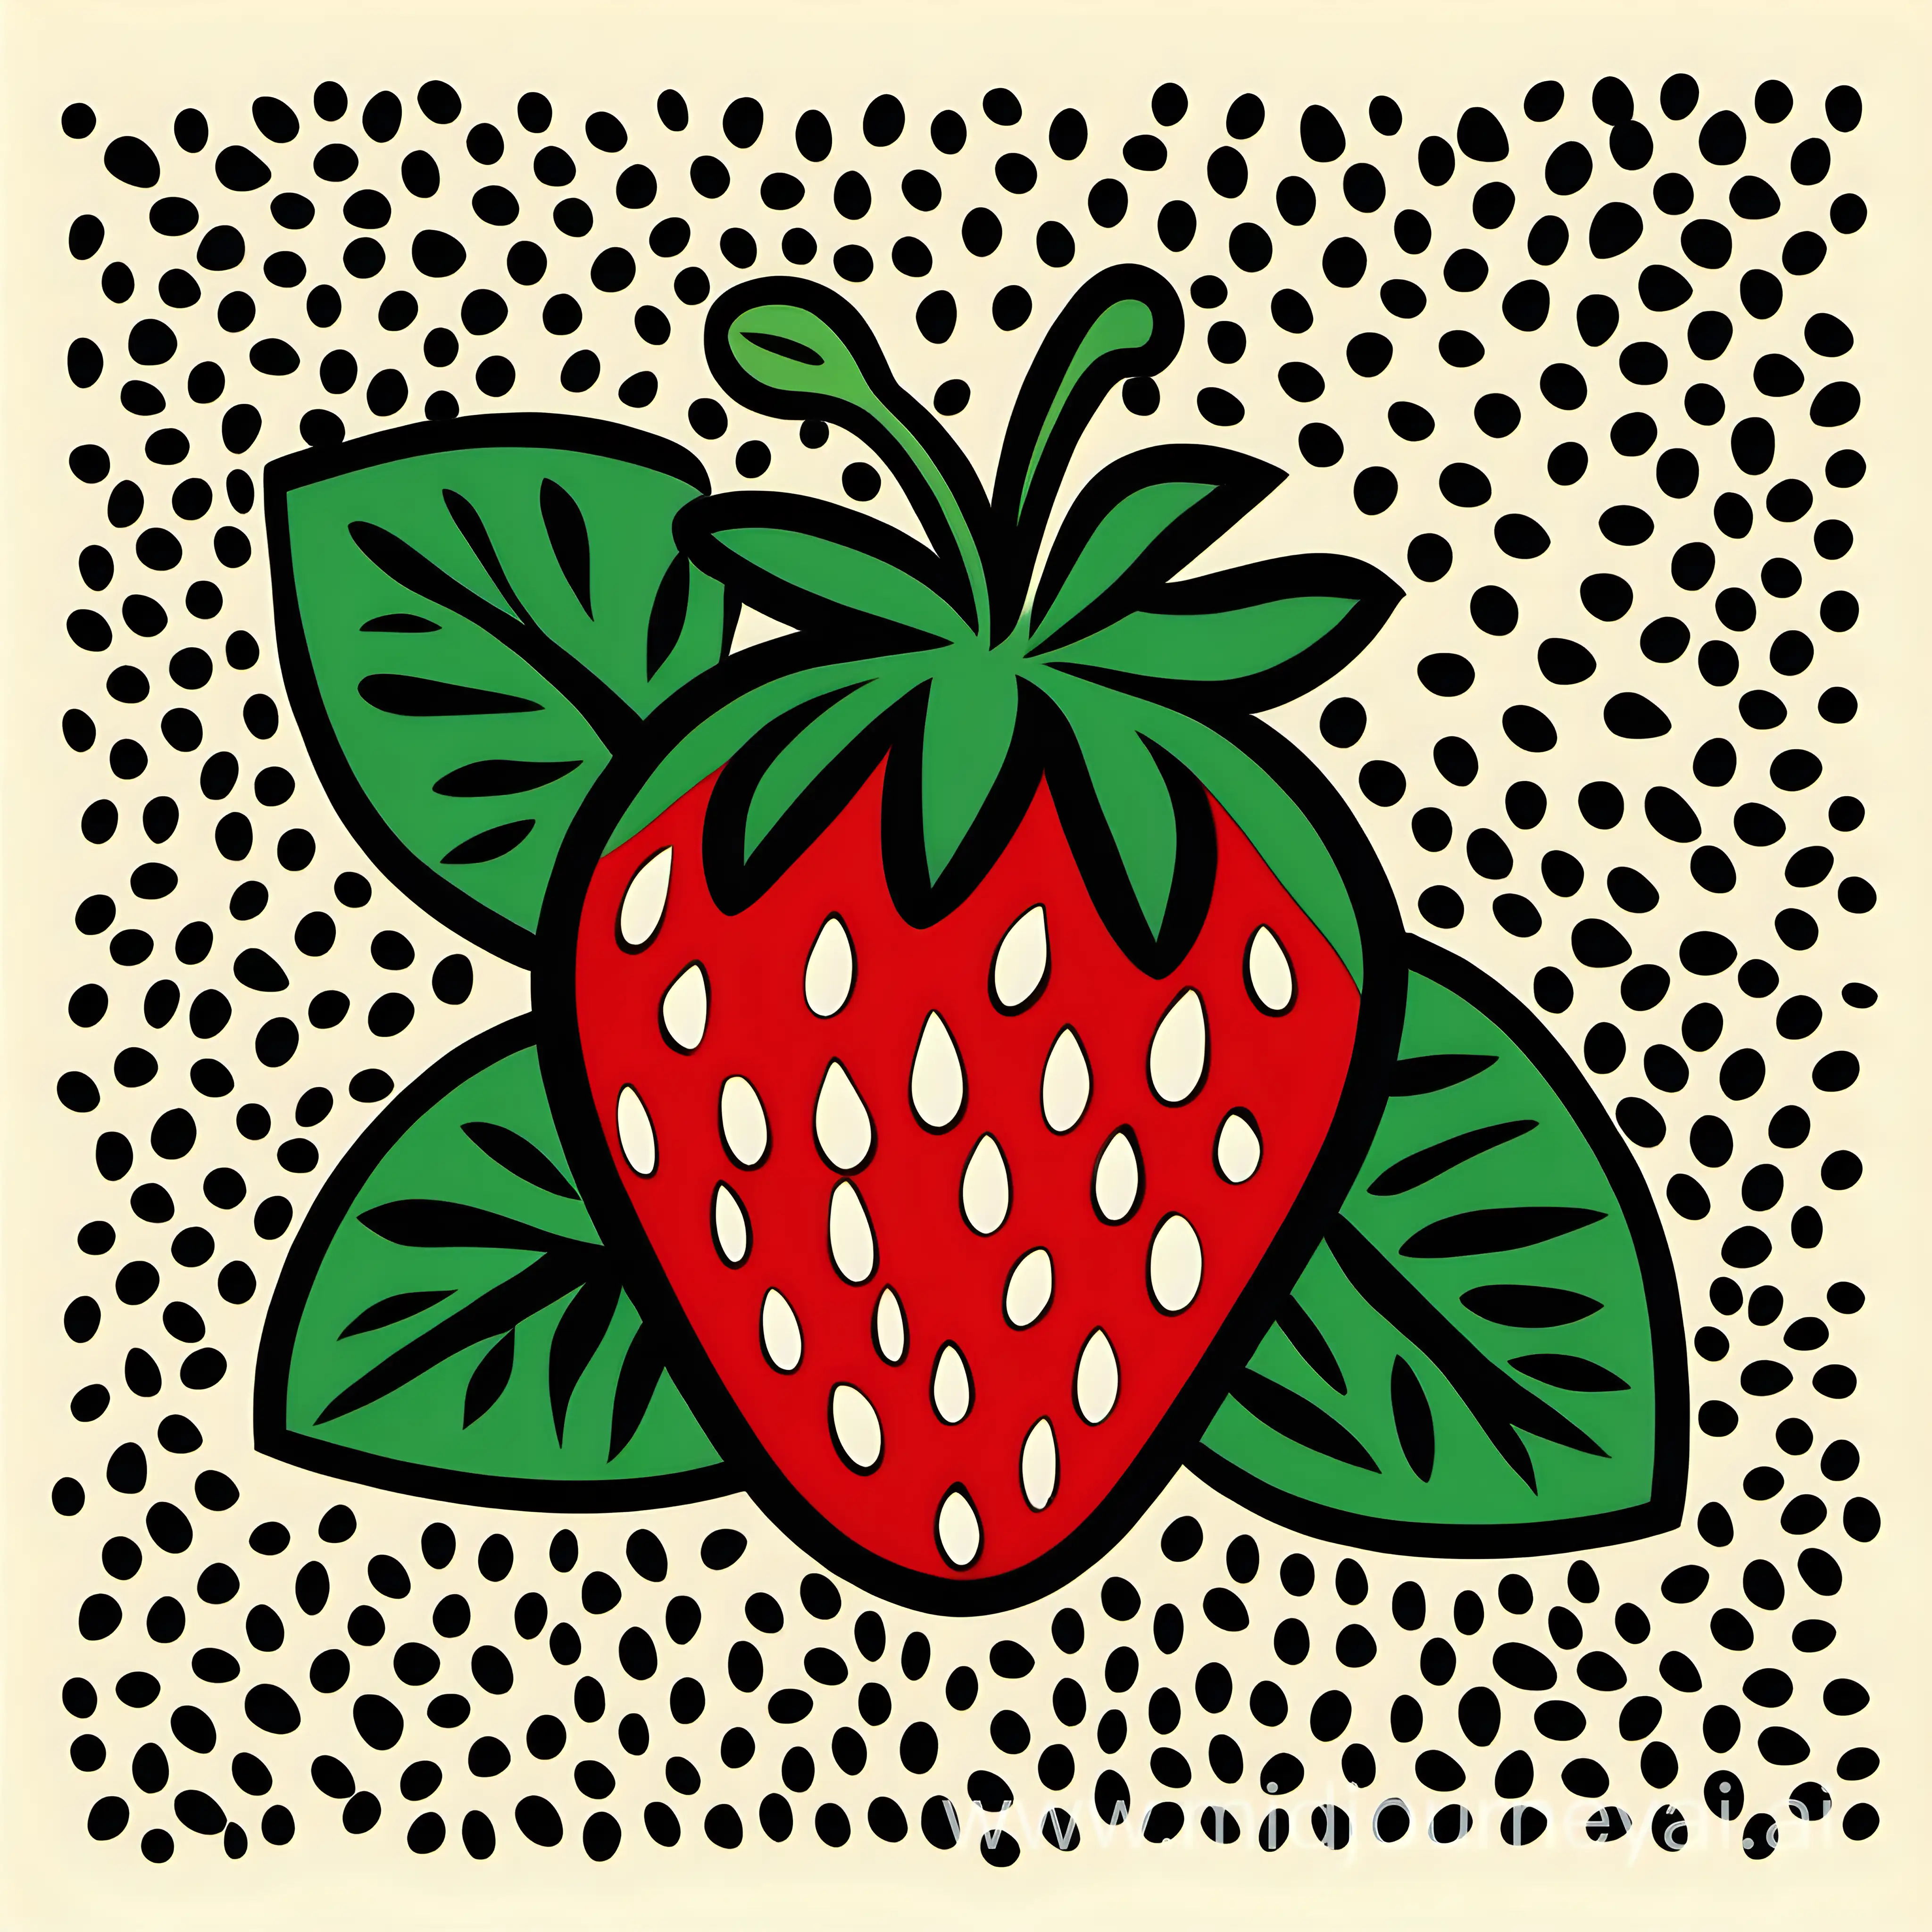 illustration of a strawberry, in the style of artist henri matisse, the Neo-Impressionist mode

